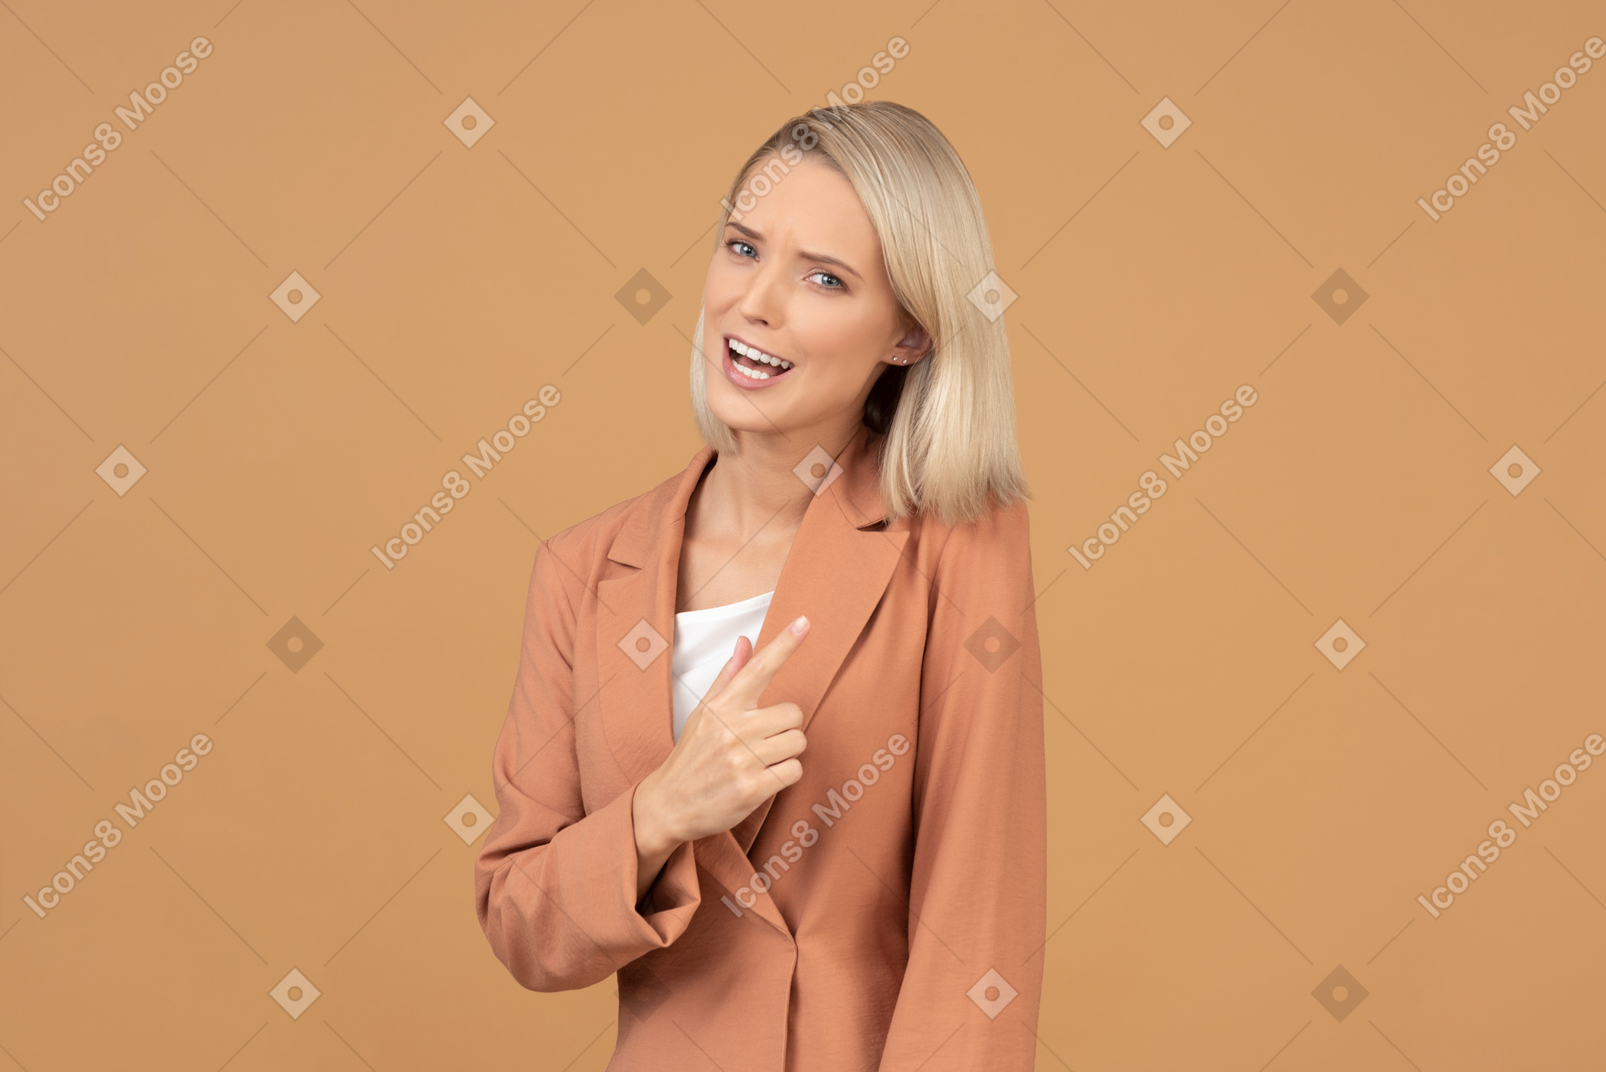 Agitated young woman making pointing gesture